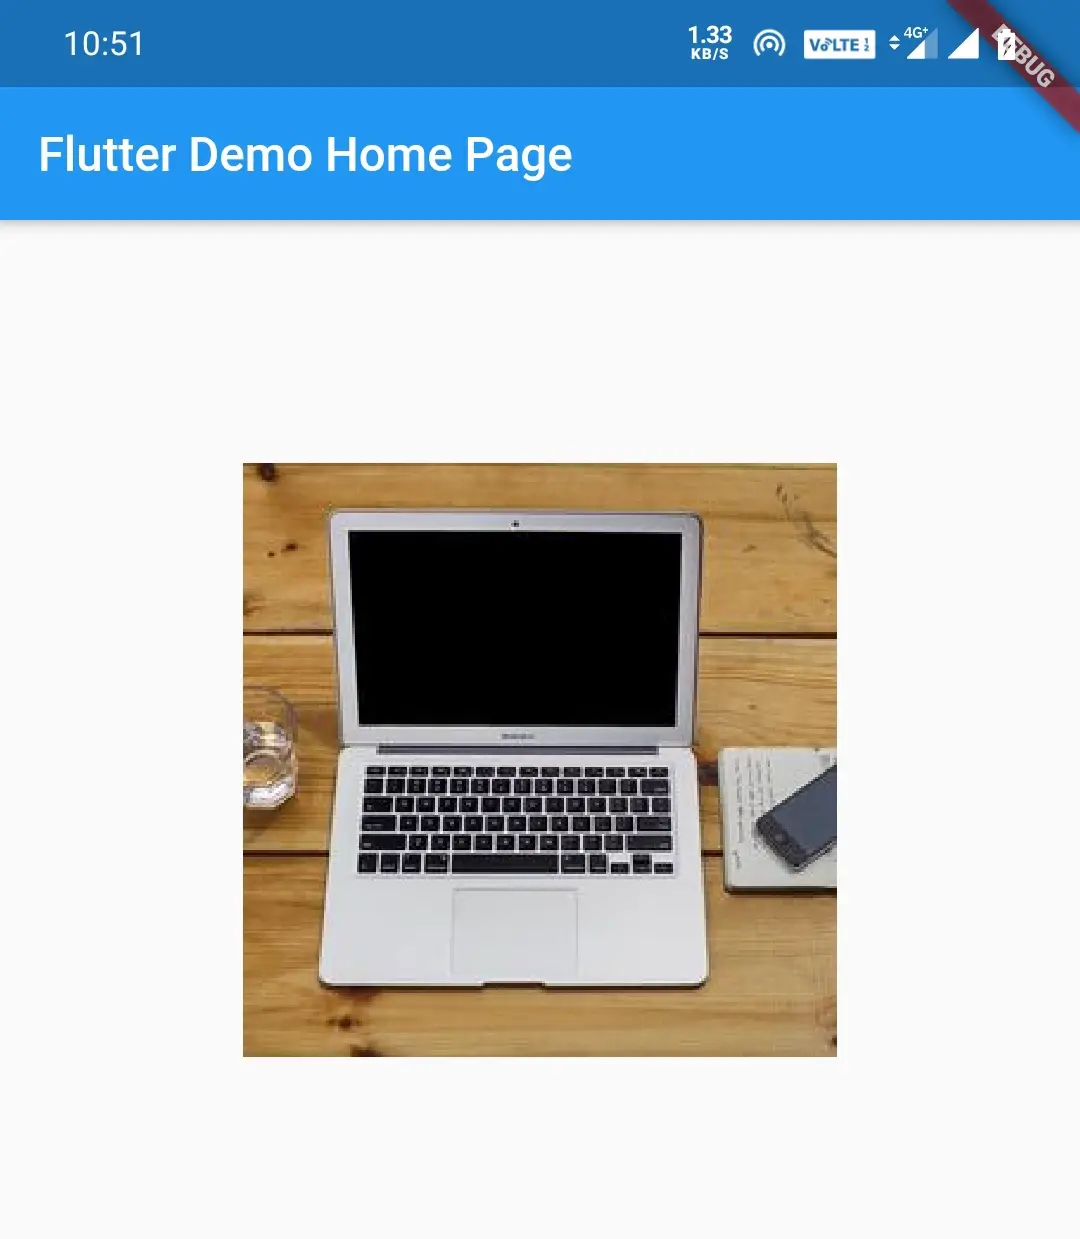 how to display image from internet url in flutter app